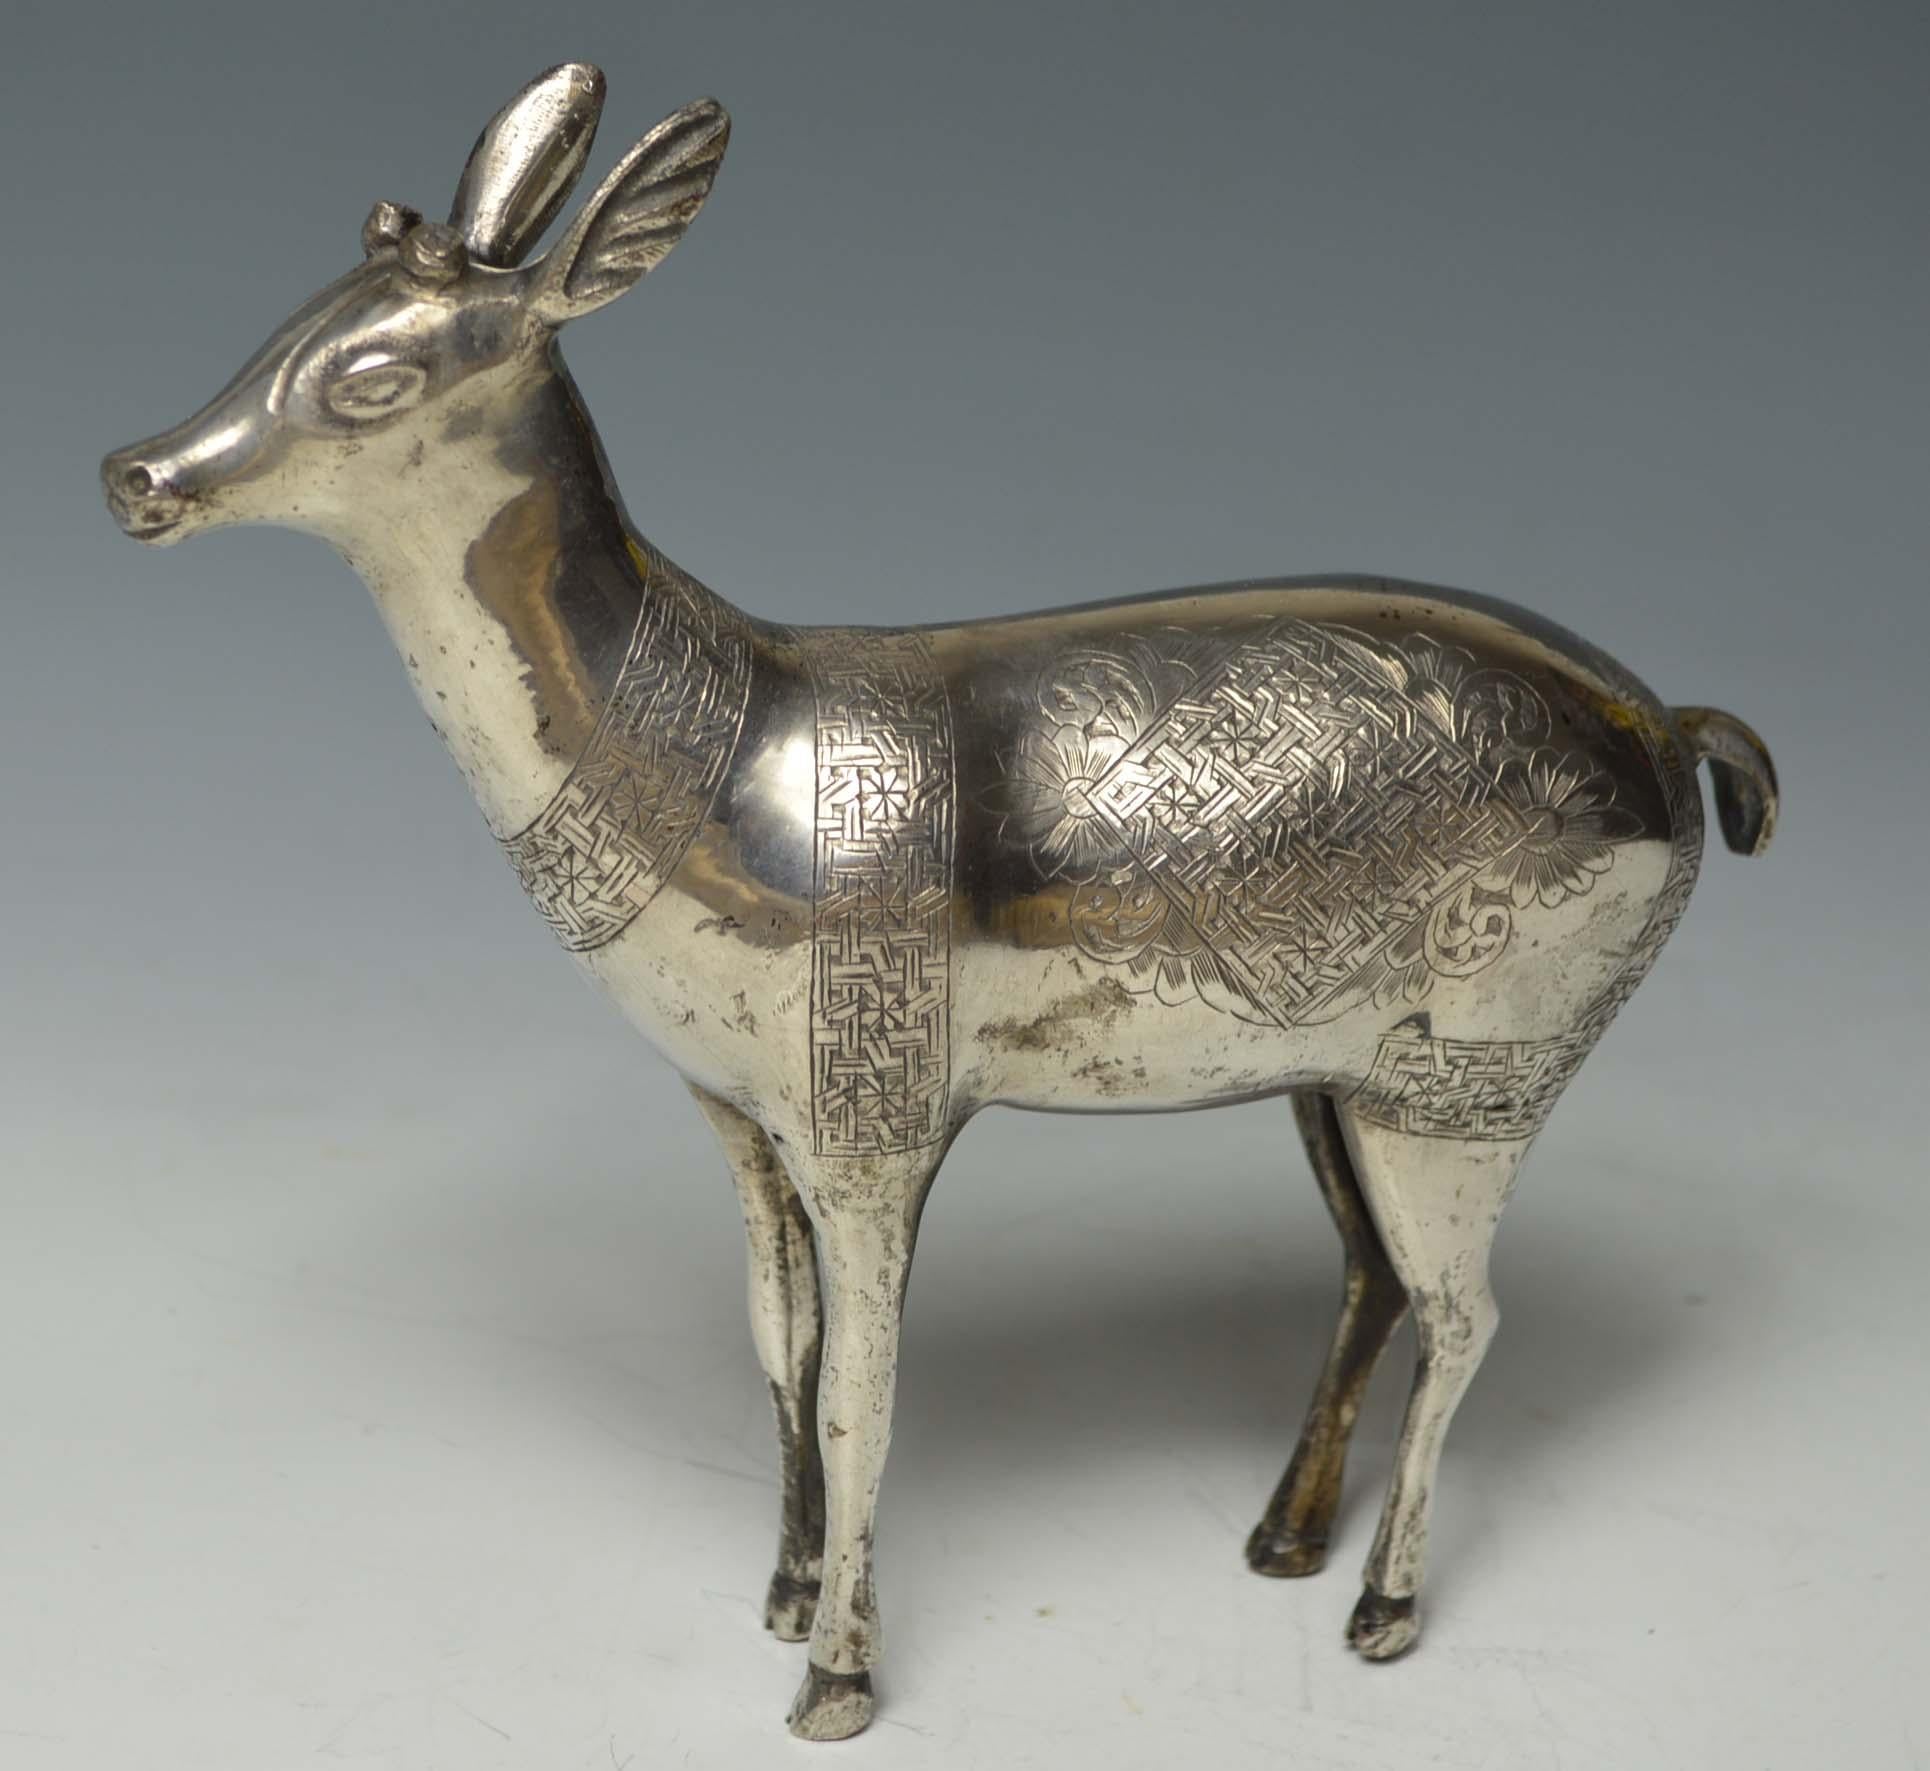 Fine rare Persian Qajar silver deer figure Islamic art
A finely made silver model of a deer with engraved designs in high grade silver
Period: Persian 19th century 
Size height 16 cm 6 inches, length 18 cm, 7 inches , weight 360 grams
condition :